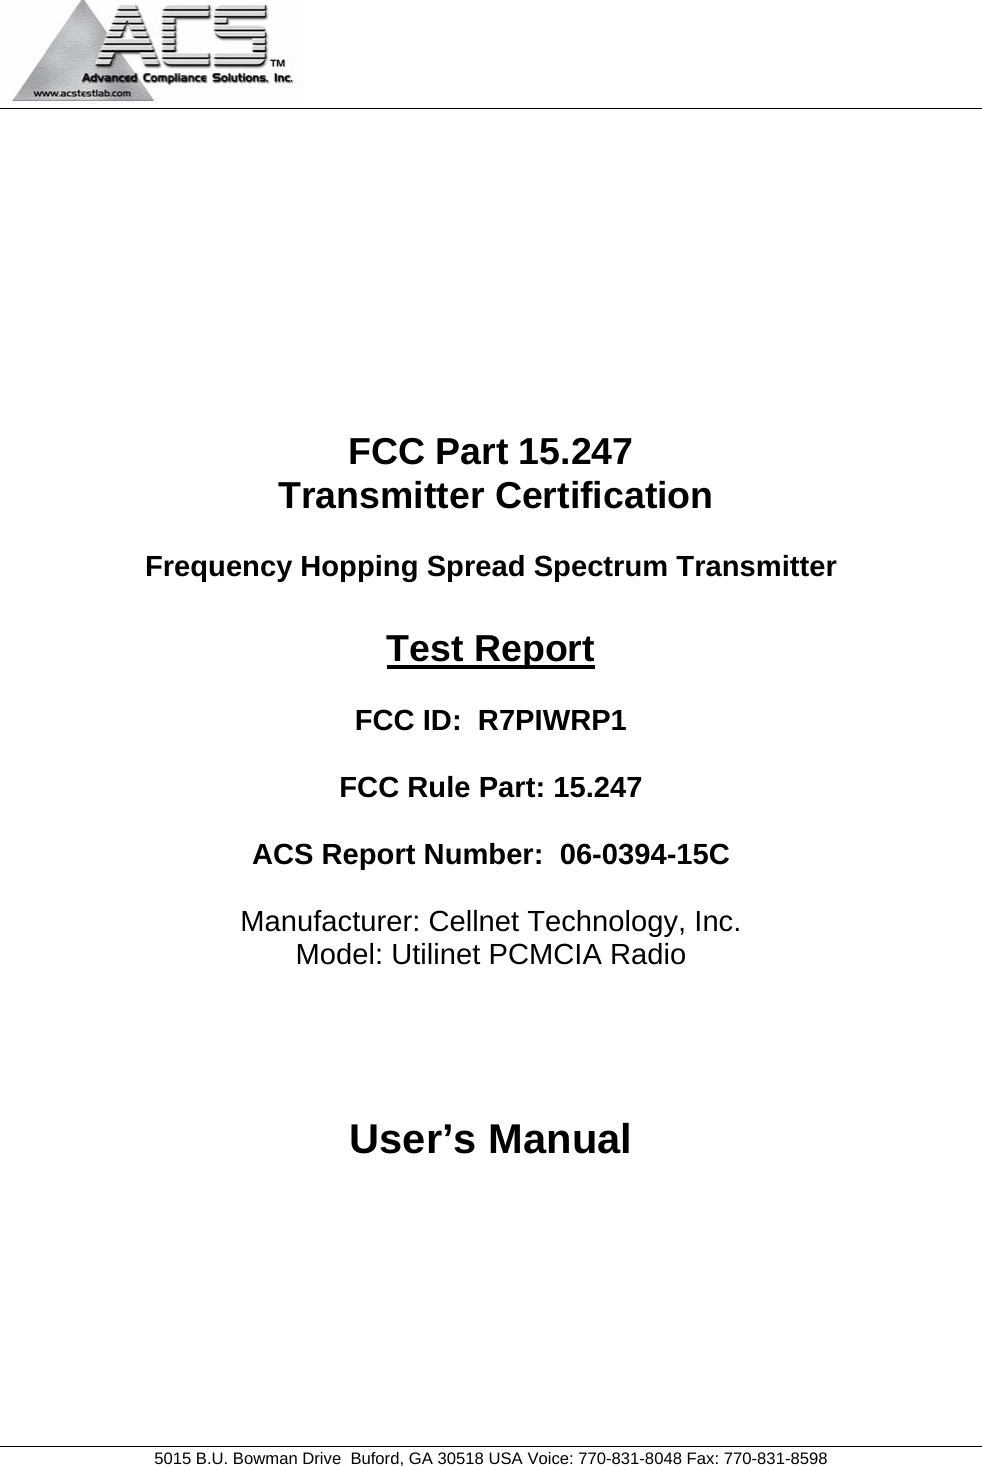   5015 B.U. Bowman Drive  Buford, GA 30518 USA Voice: 770-831-8048 Fax: 770-831-8598    FCC Part 15.247  Transmitter Certification  Frequency Hopping Spread Spectrum Transmitter  Test Report  FCC ID:  R7PIWRP1  FCC Rule Part: 15.247  ACS Report Number:  06-0394-15C   Manufacturer: Cellnet Technology, Inc. Model: Utilinet PCMCIA Radio    User’s Manual 